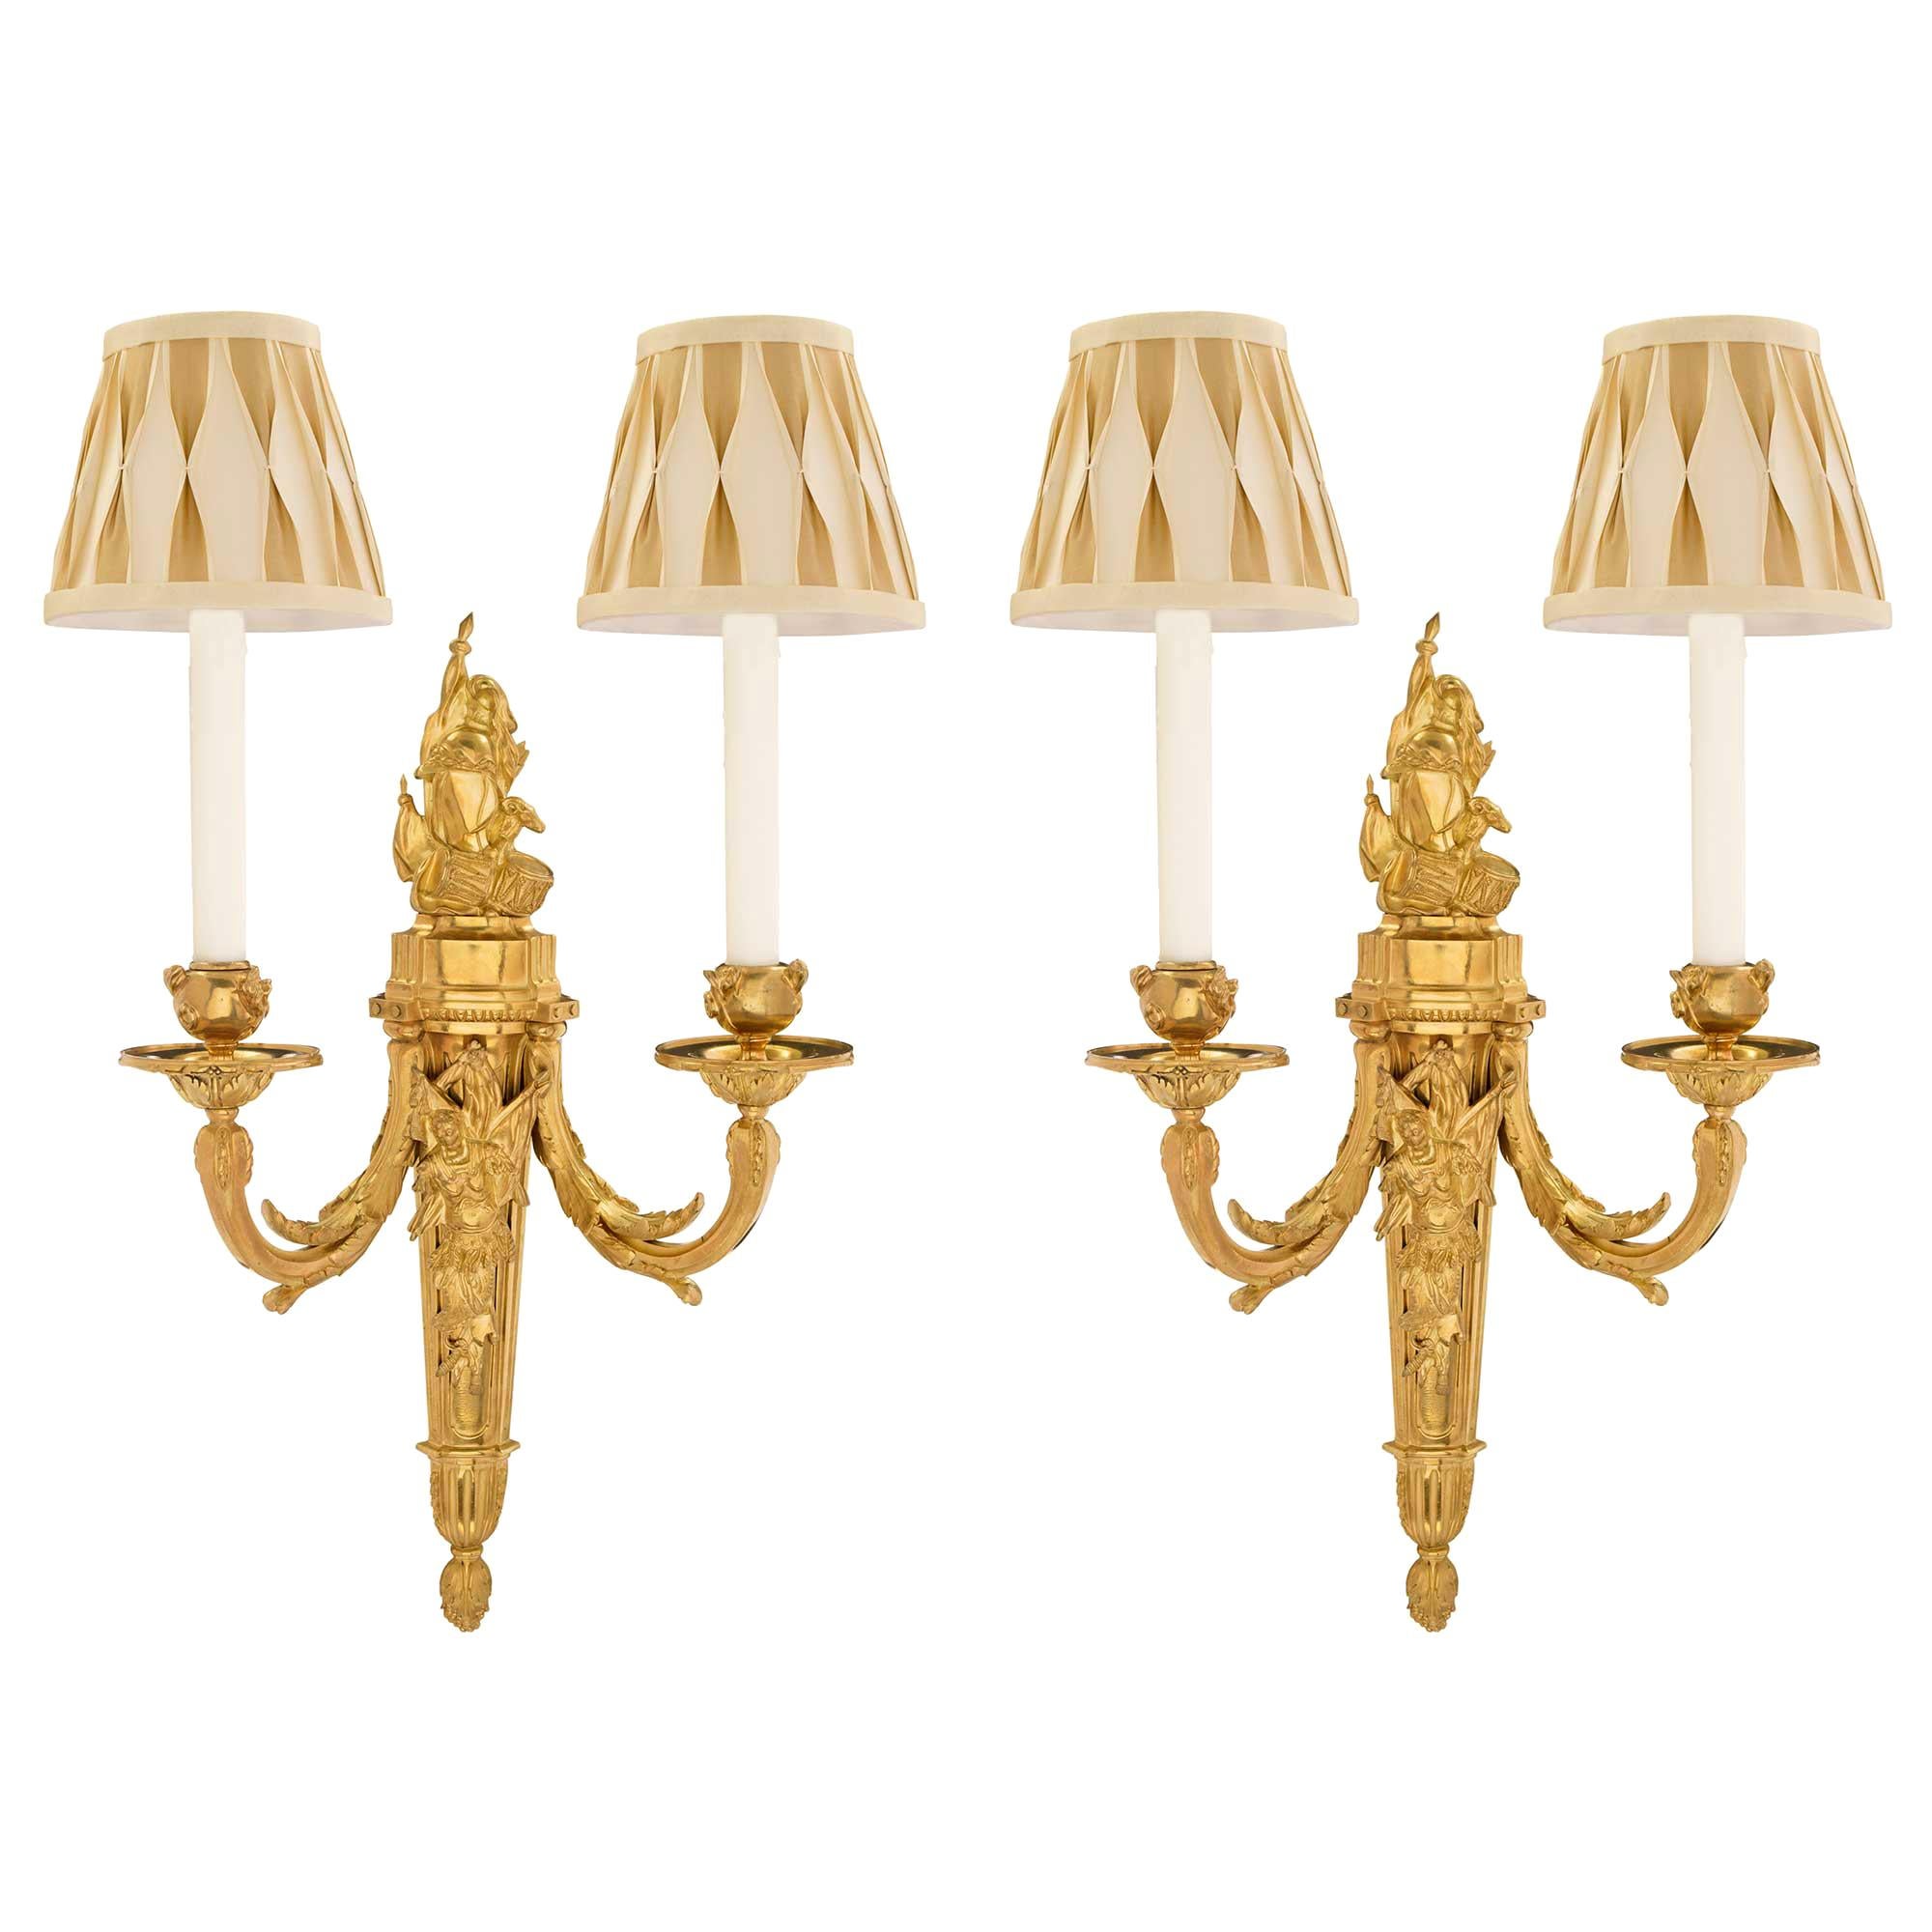 Pair of French Early 19th Century Louis XV Style Ormolu Two-Arm Sconces For Sale